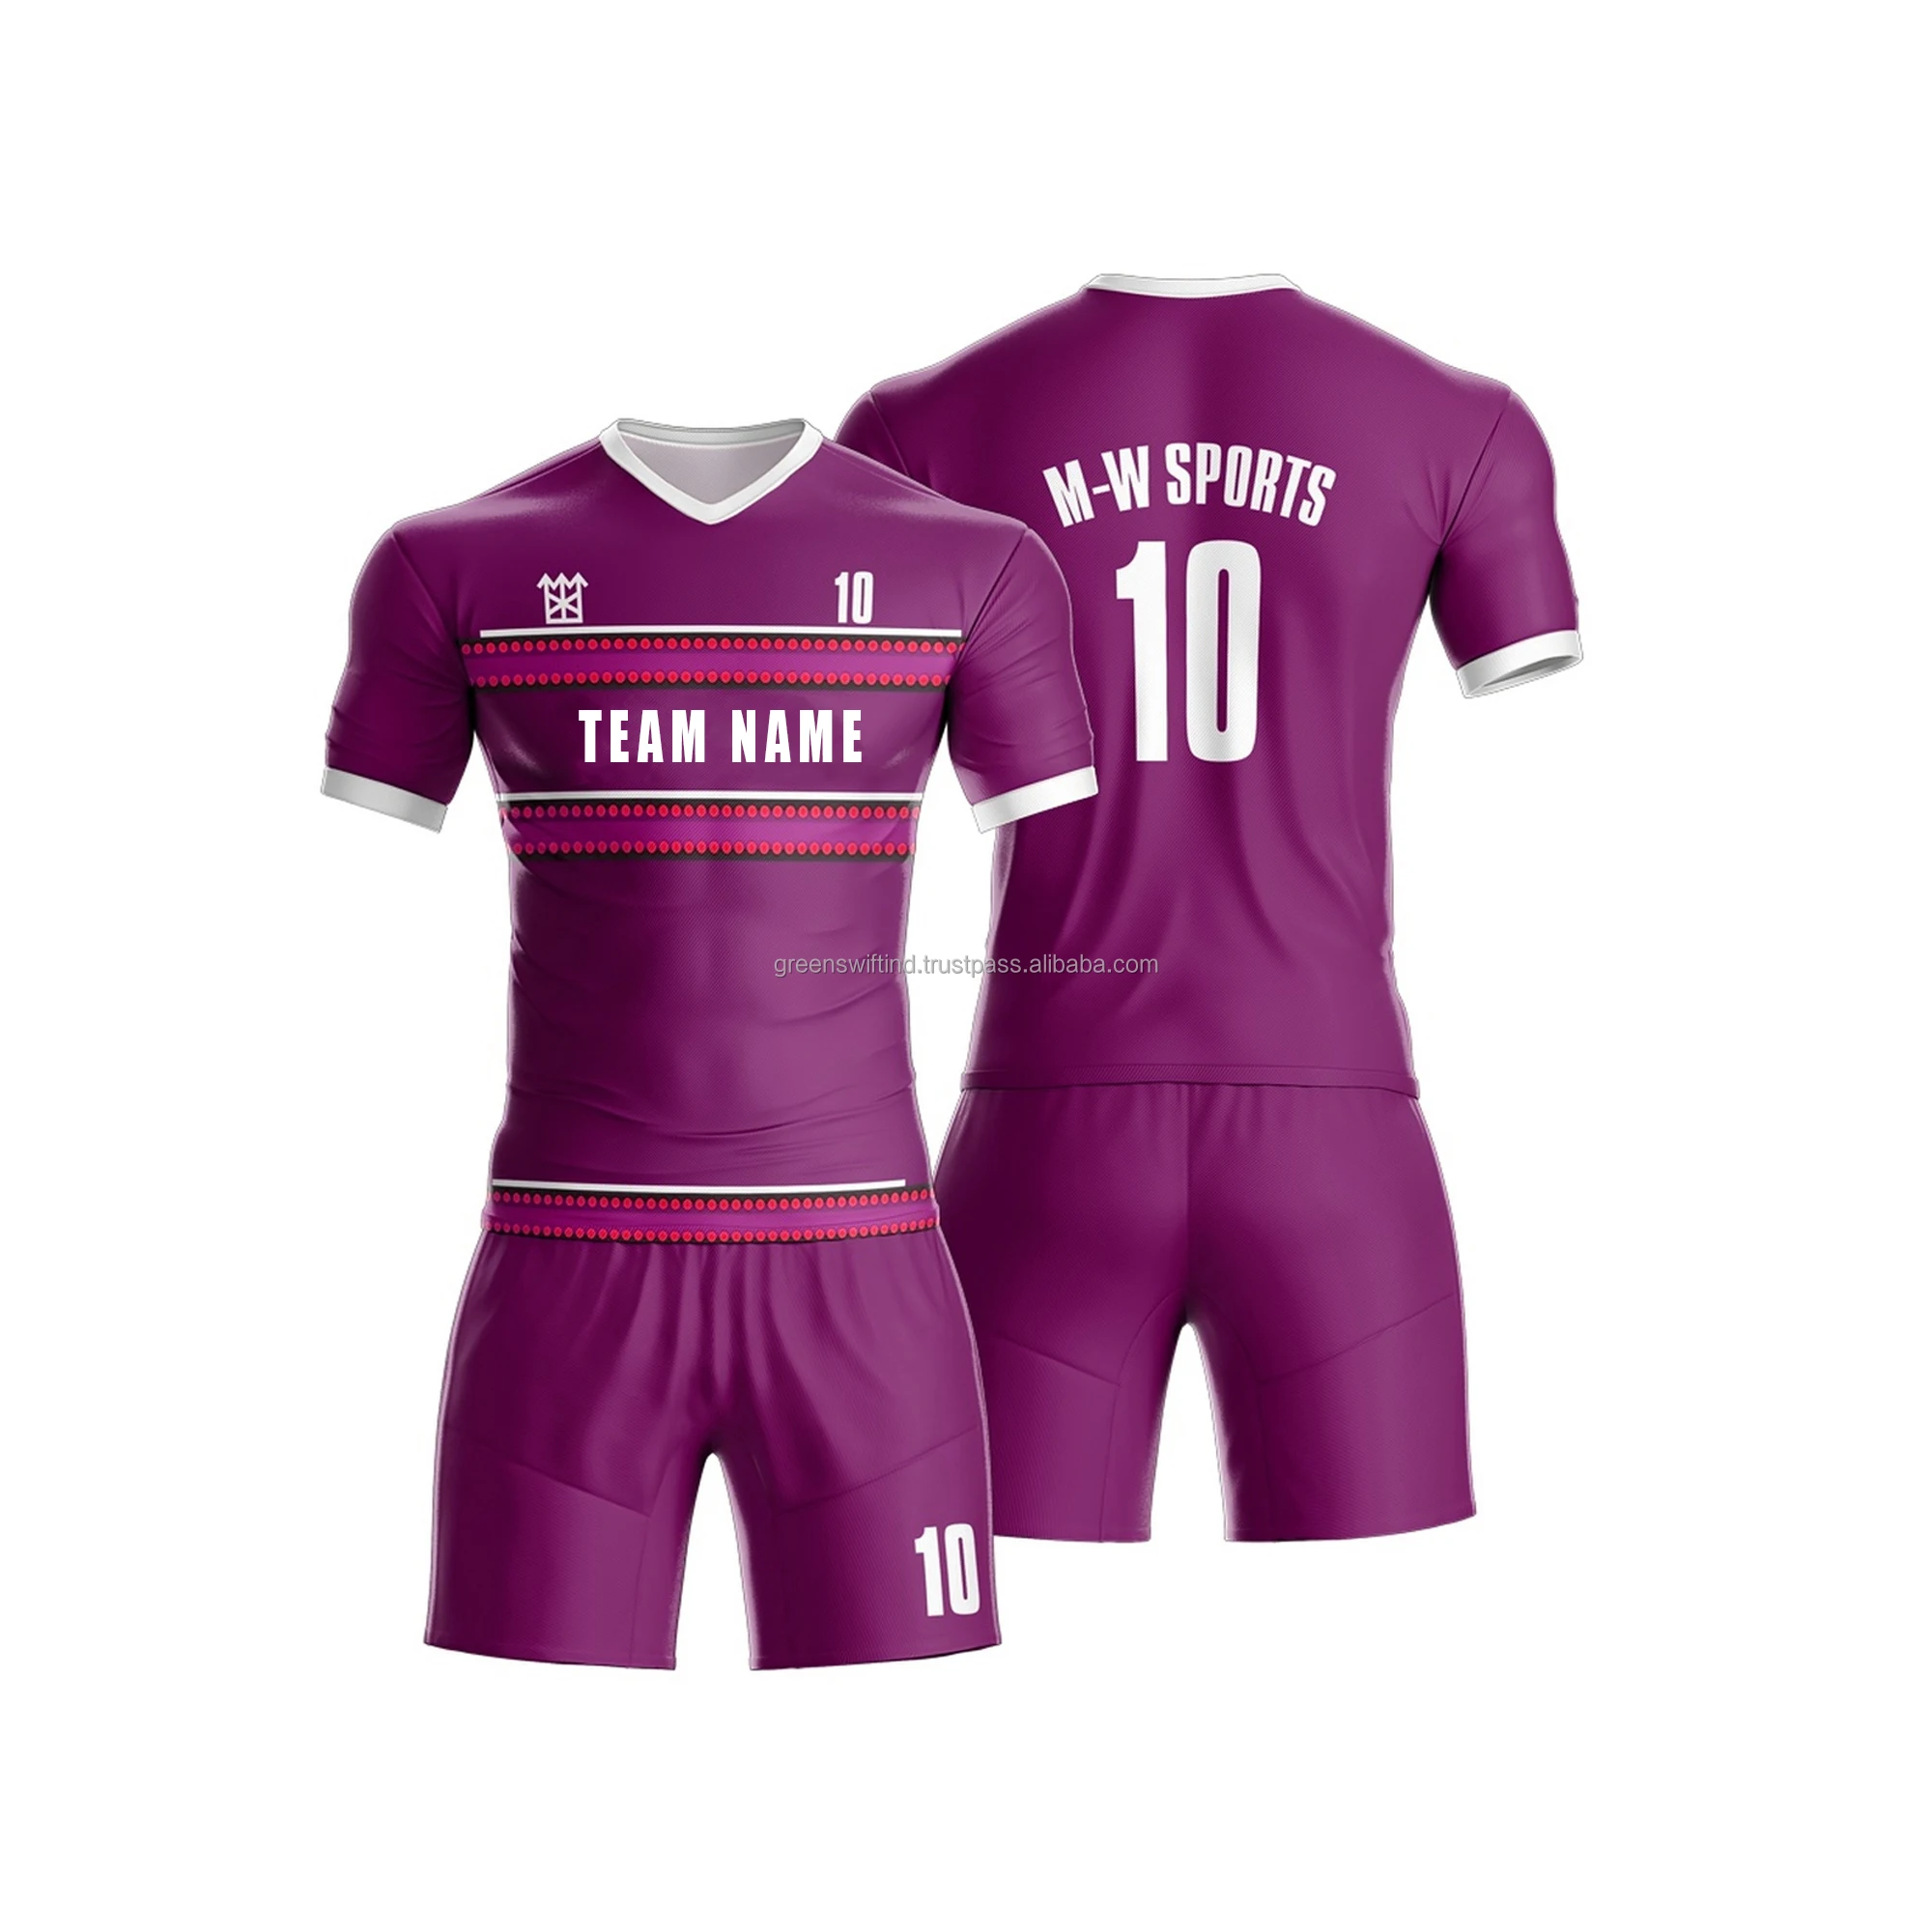 Professional Adults Children Personalized Blank Uniform Soccer Jersey 100%  Polyester Football Shirt Soccer Kits Training Suit